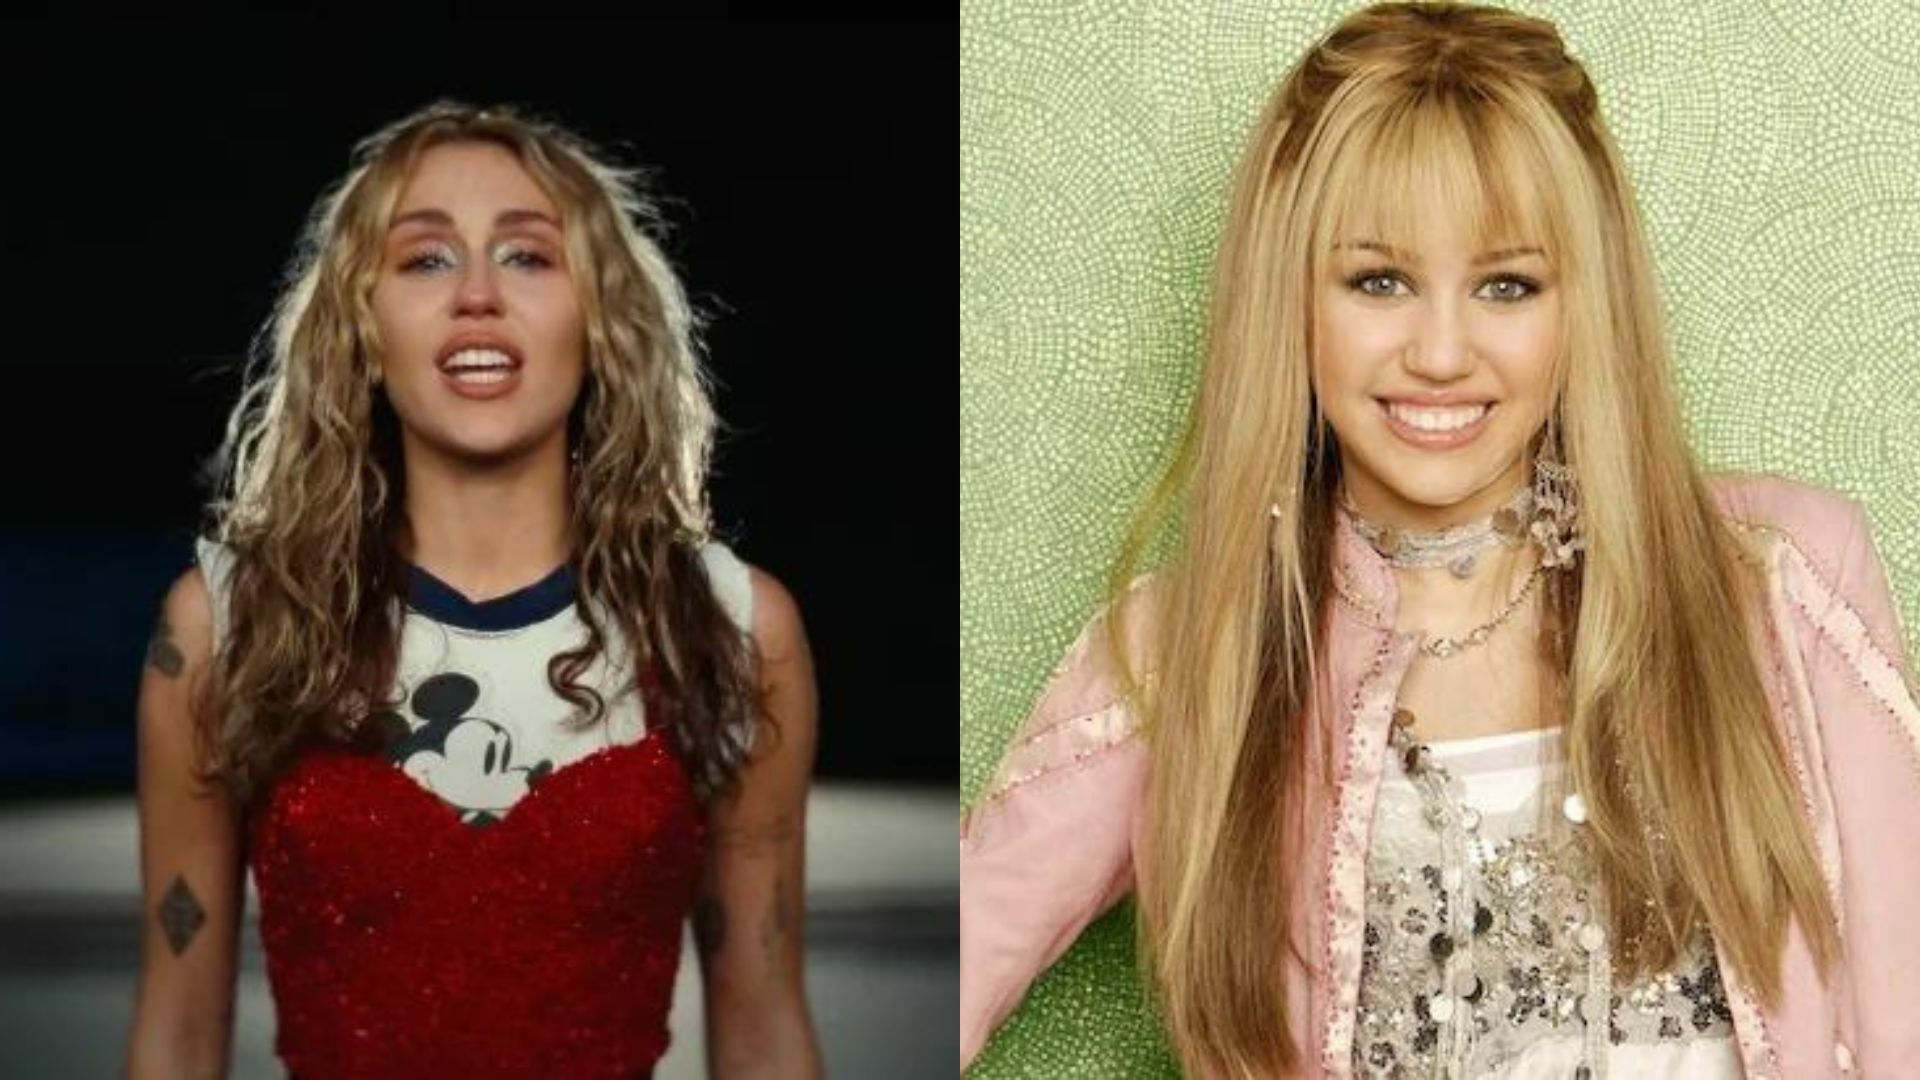 Miley Cyrus Used to be young Hanna Montana